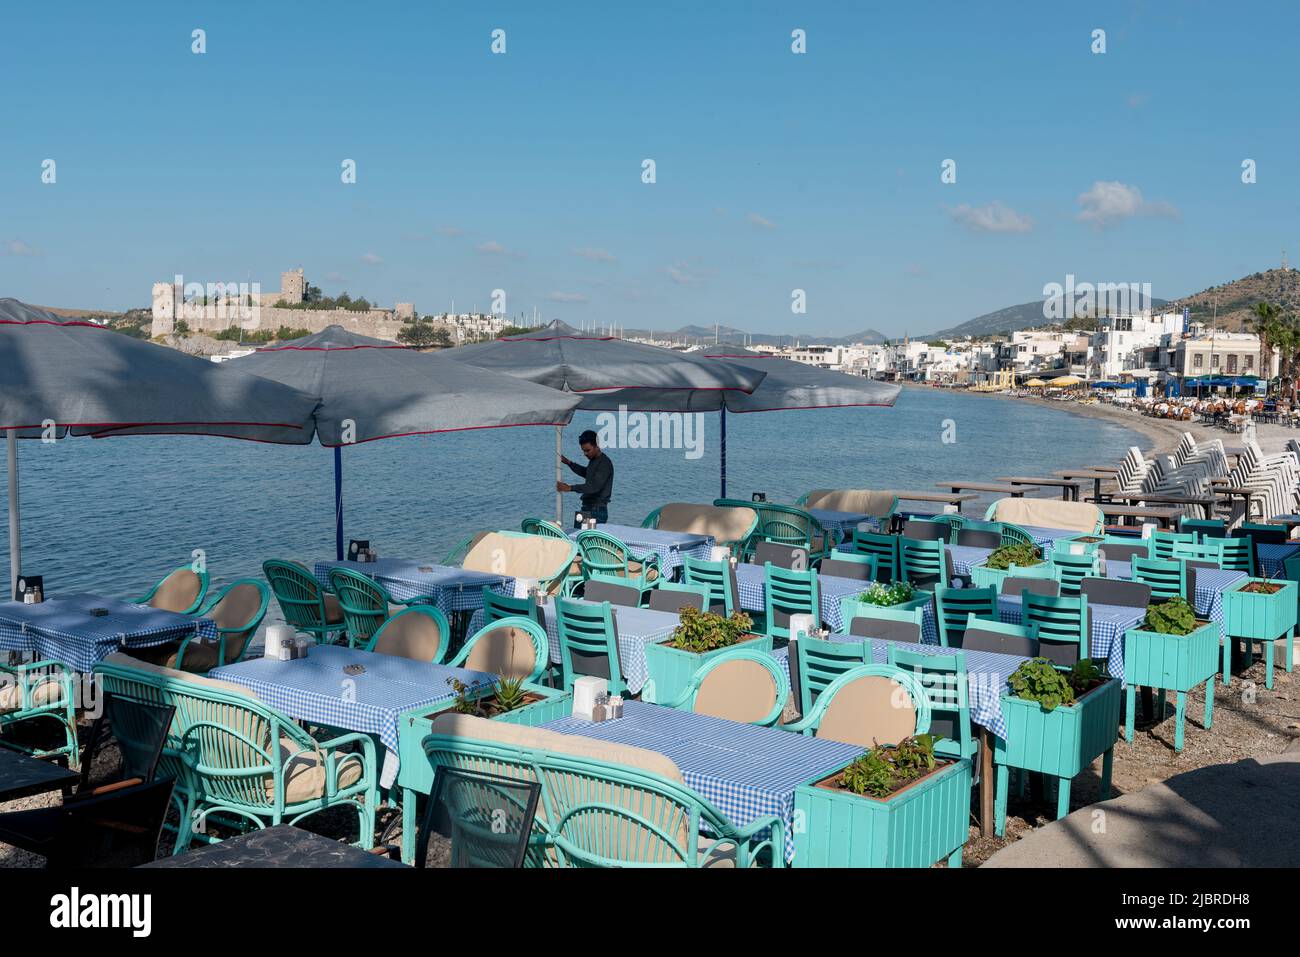 Bodrum, Mugla, Turkey. April 21st 2022 A waiter prepares tables on the beach side cafe in Bodrum harbour with Bodrum Castle in the background, the Aeg Stock Photo